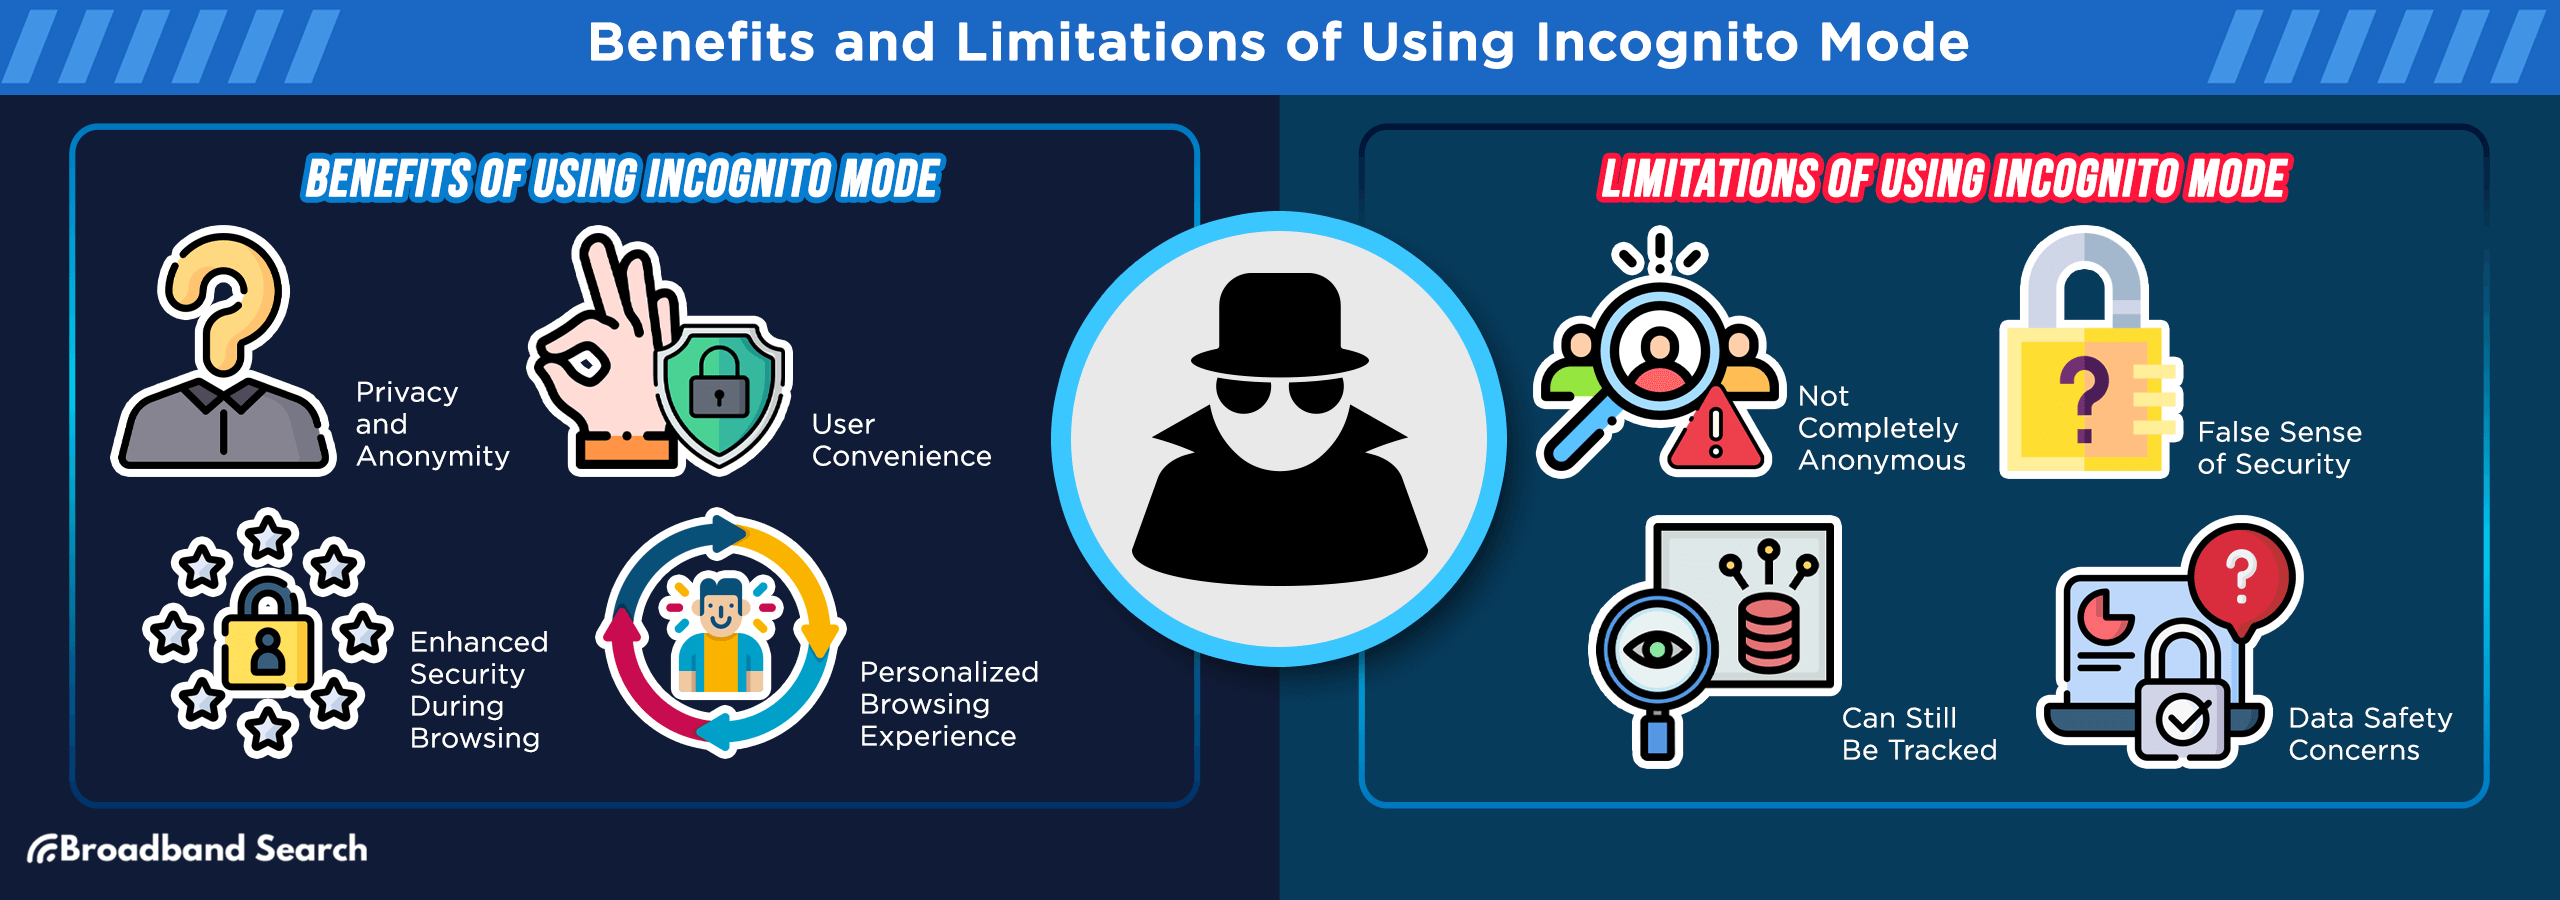 Benefits and limitation of using incognito mode